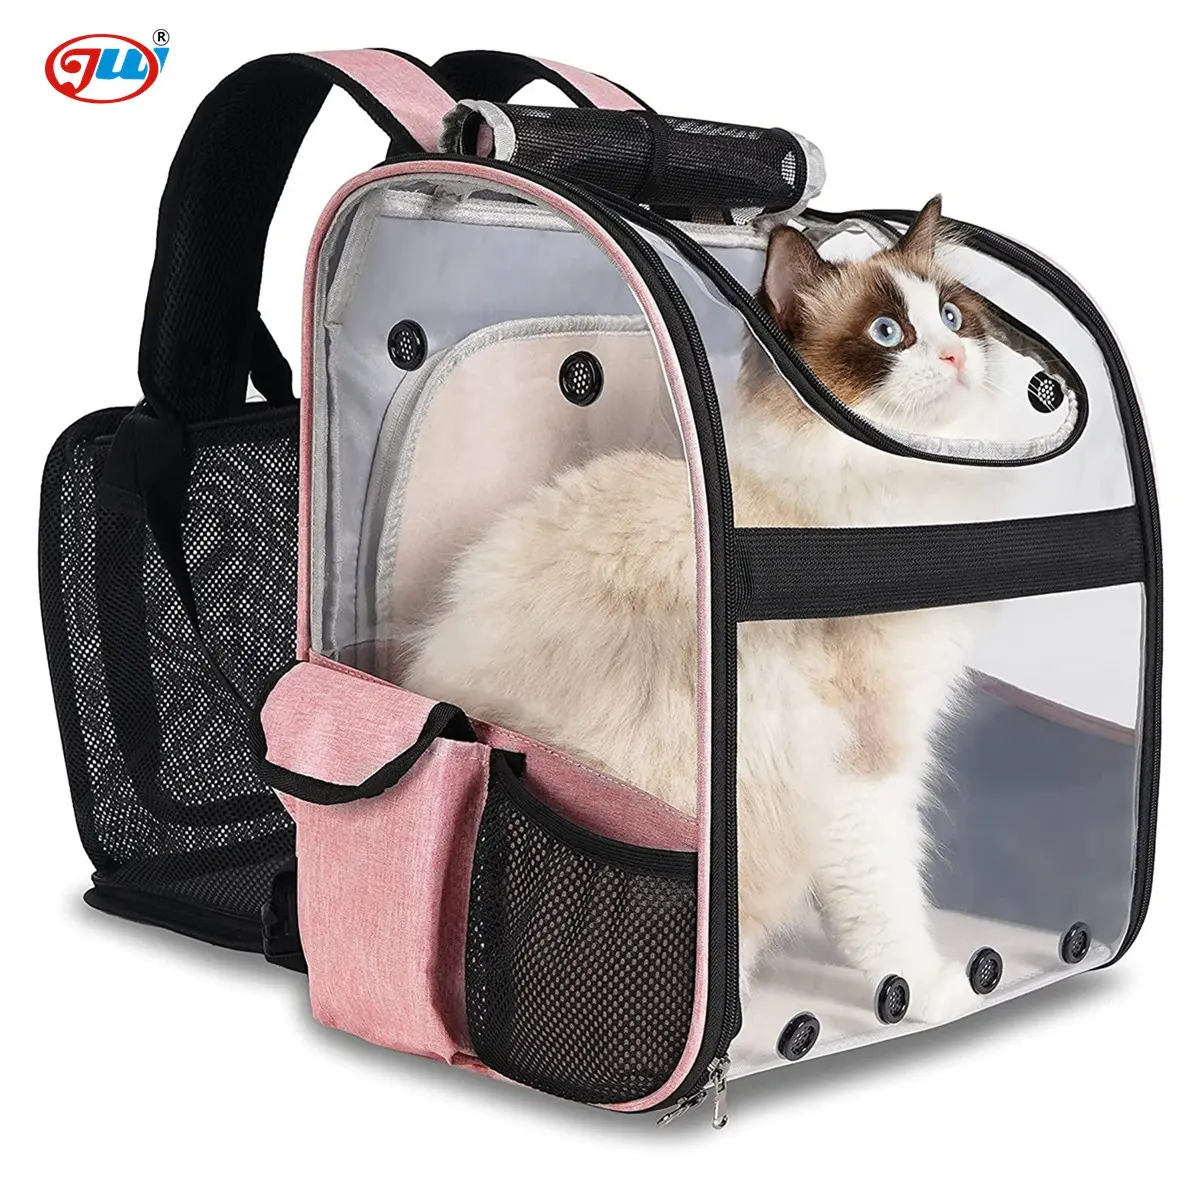 Cat Backpack Carrier, Expandable Pet Carrier Backpack for Cats and Small Dogs, Pet Travel Carrier Dog Hiking Back Pack Opp Bag